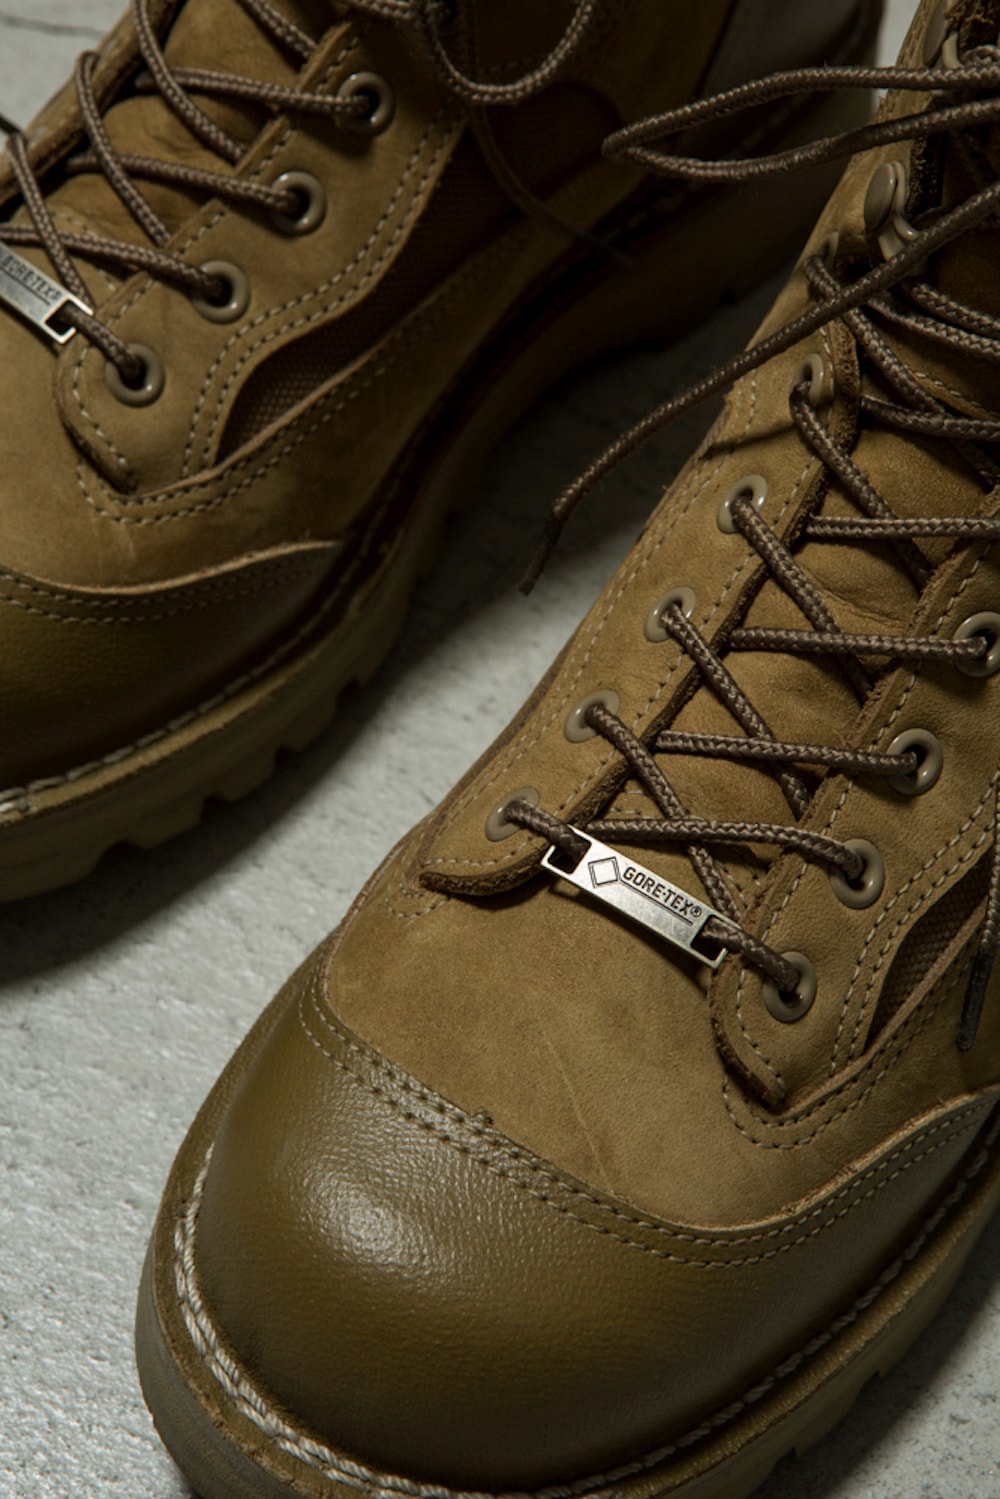 N.HOOLYWOOD x Danner Military Boots